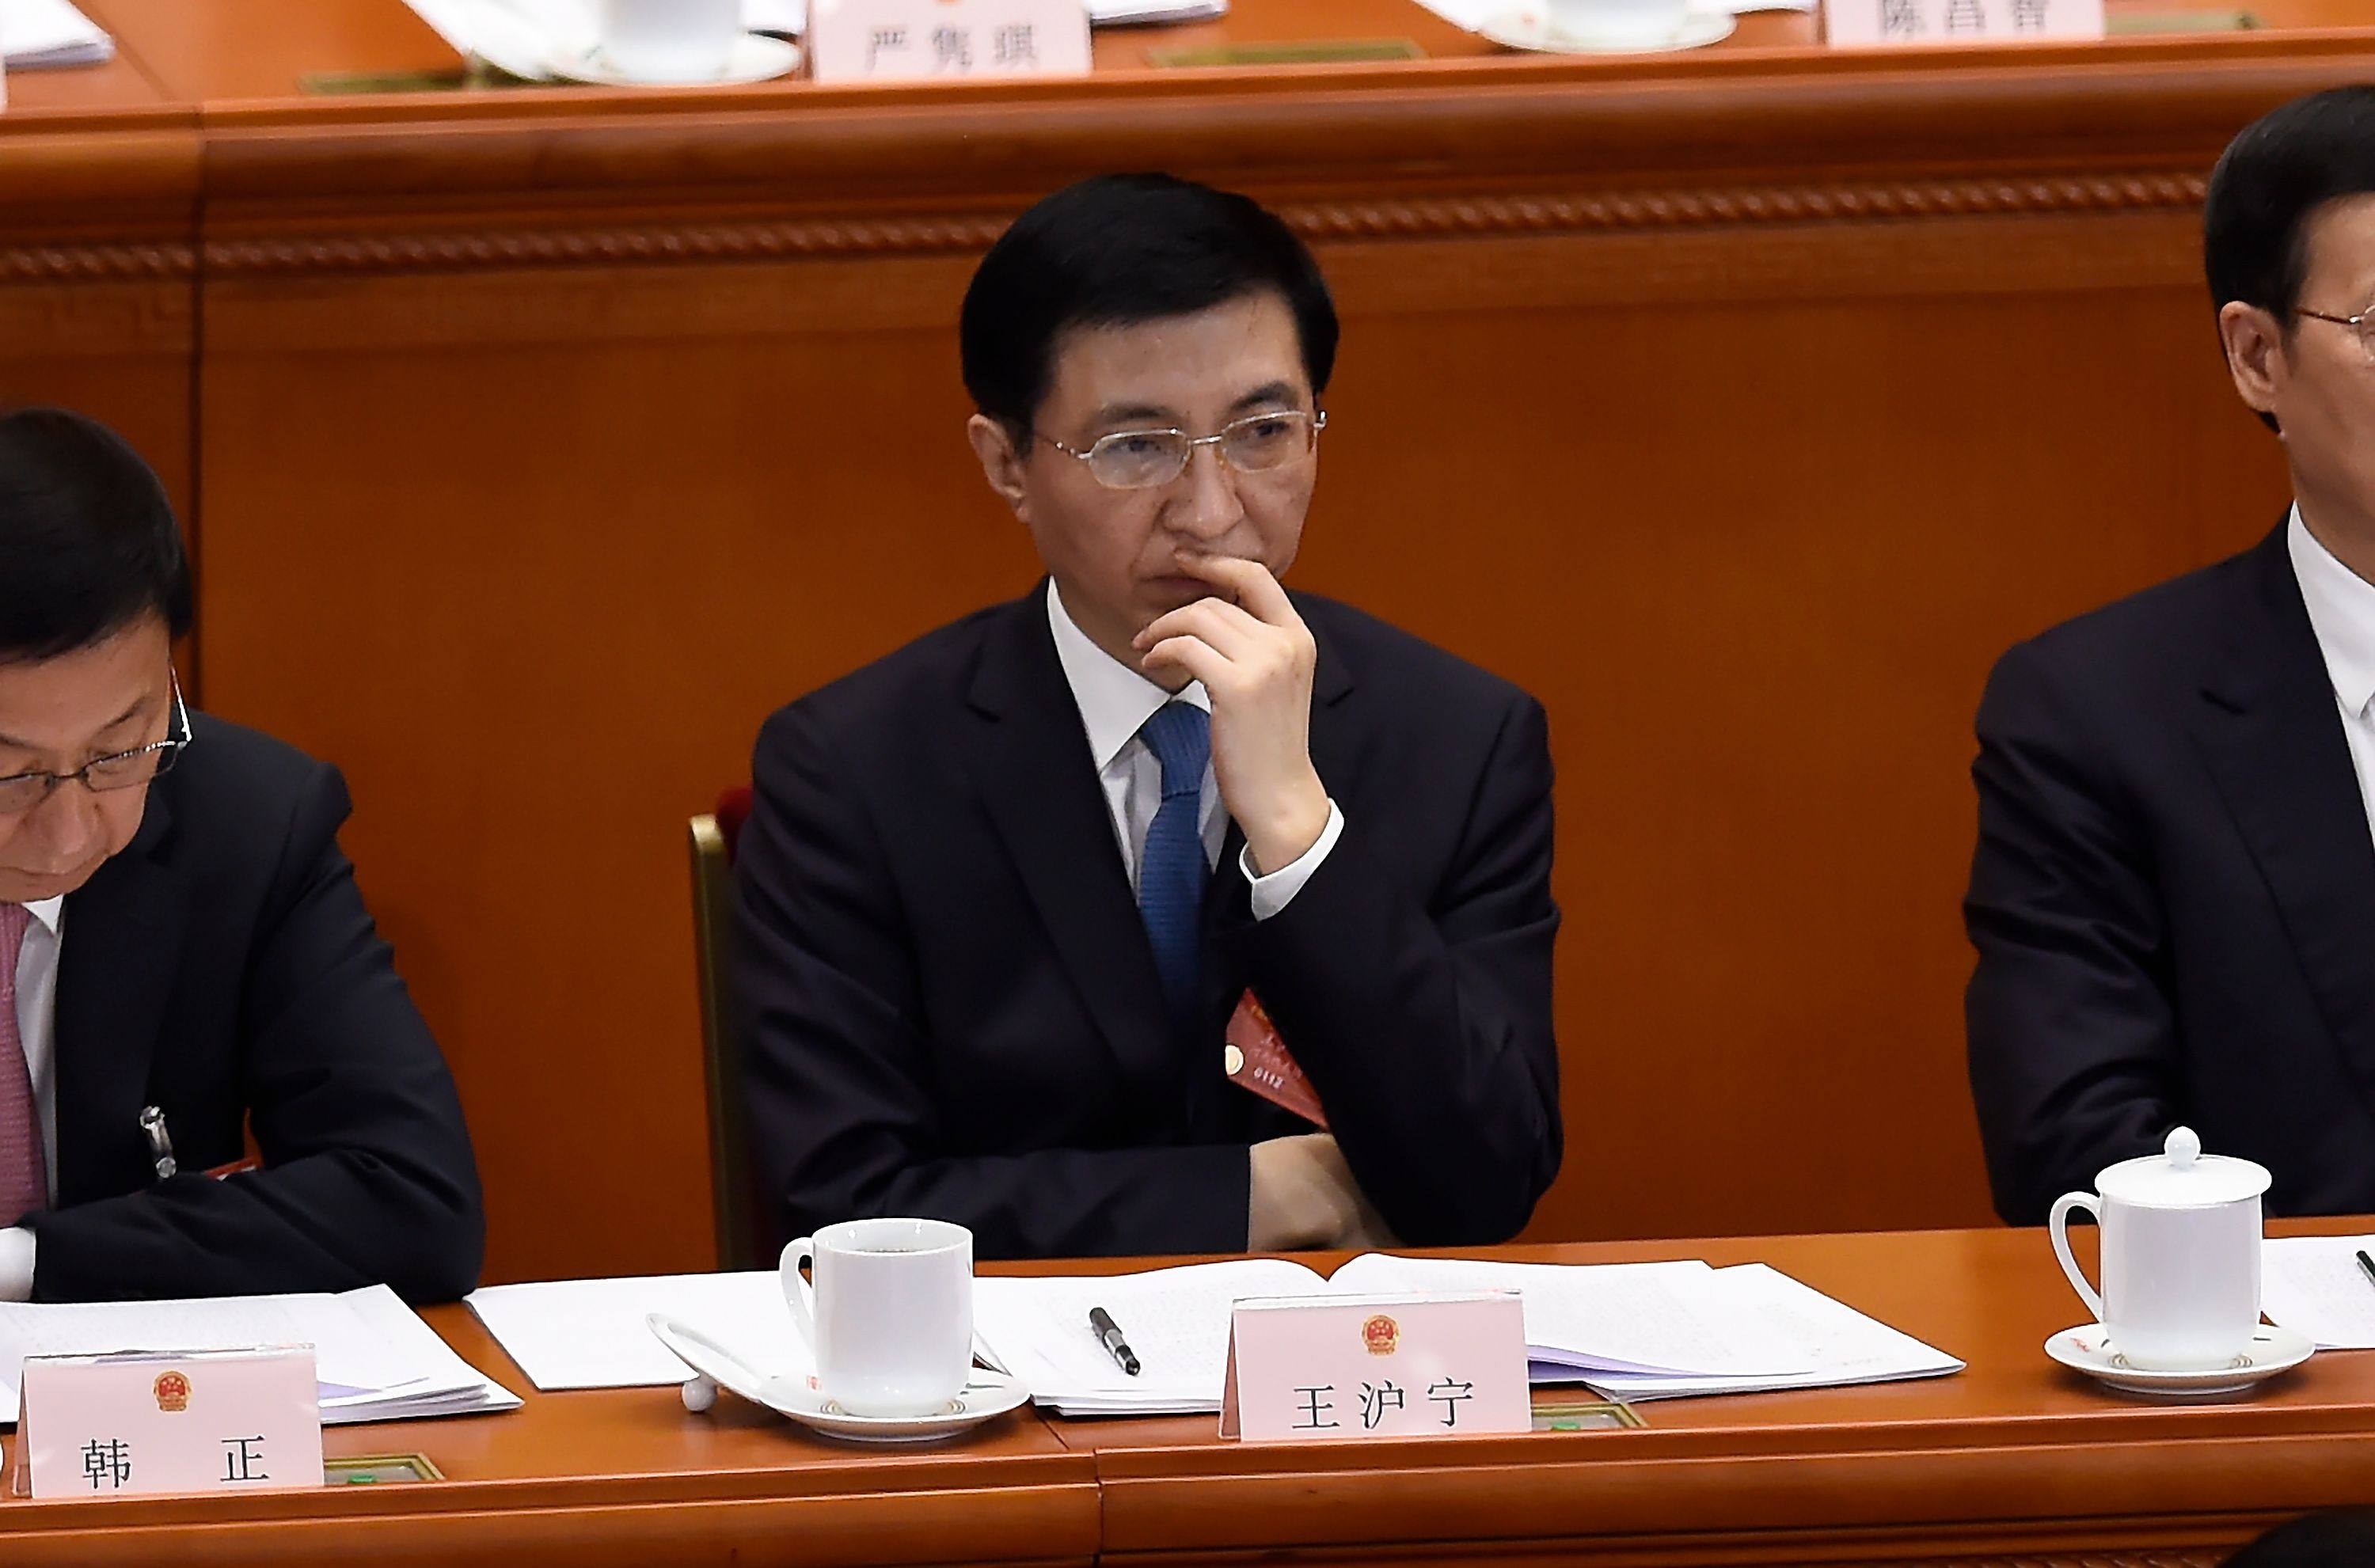 Wang Huning is tipped to rise up the ranks to be NPC chairman. Photo: AFP